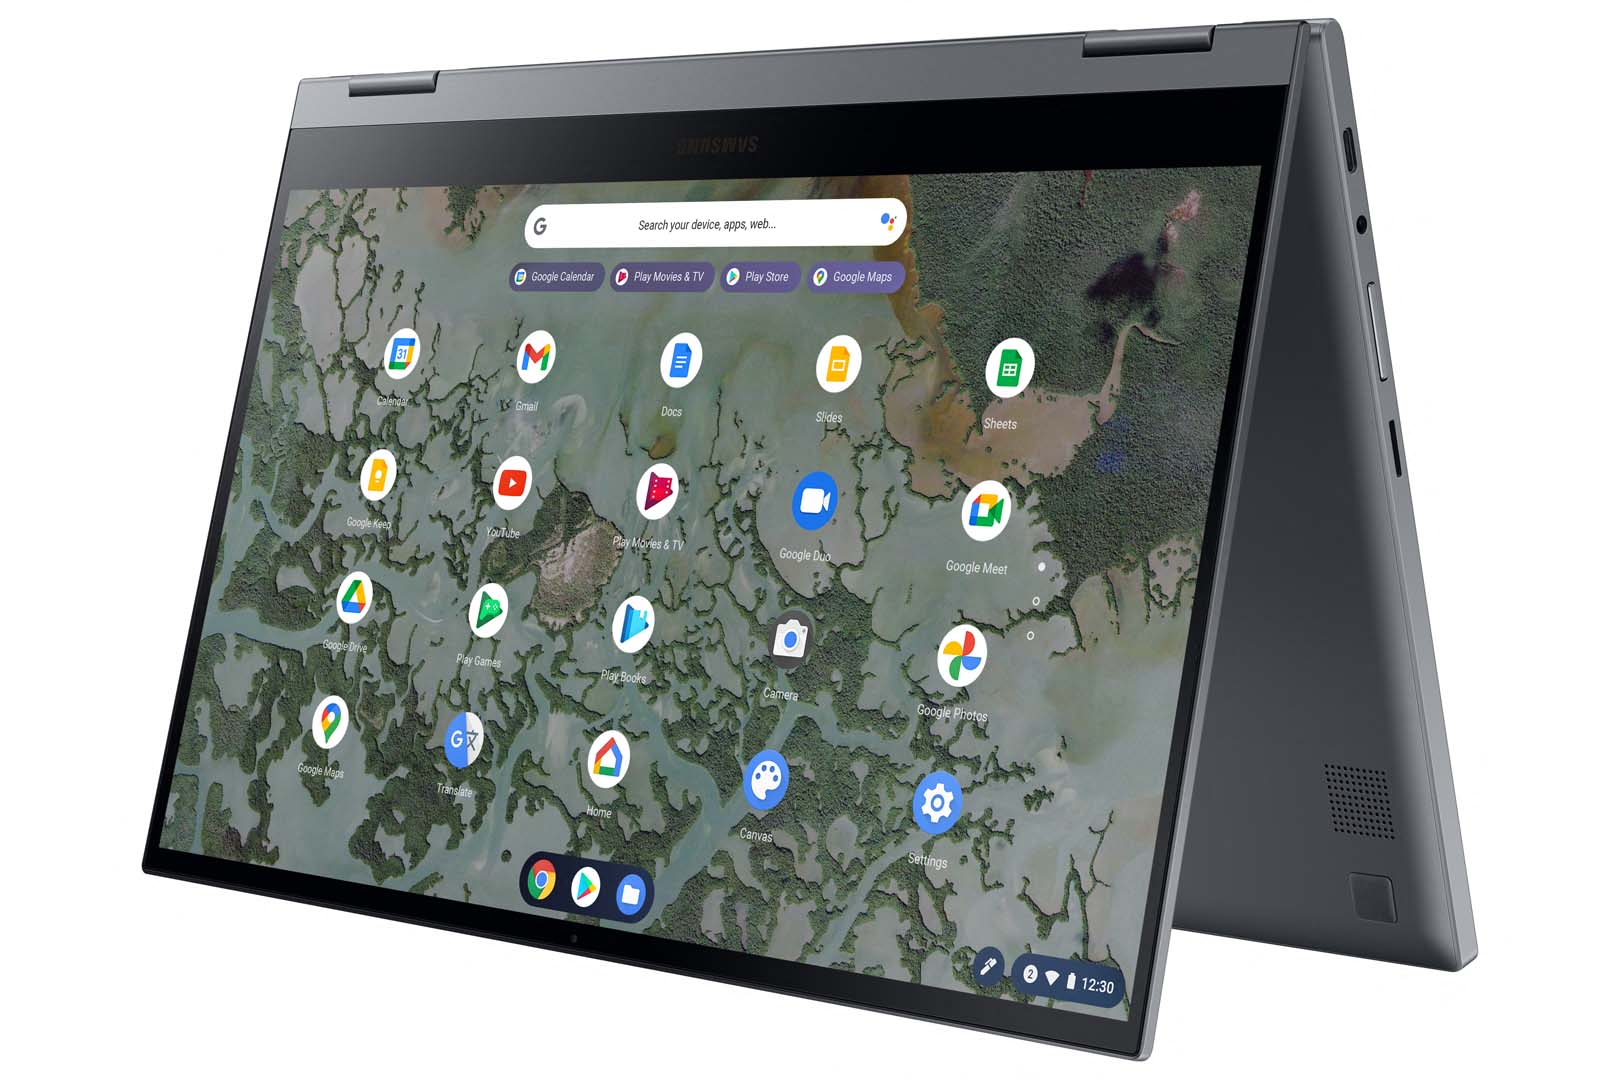 4K AMOLED Samsung Galaxy Chromebook 2 now available Galaxy-Chromebook-2-Right-Perspective-3-Gray.jpg